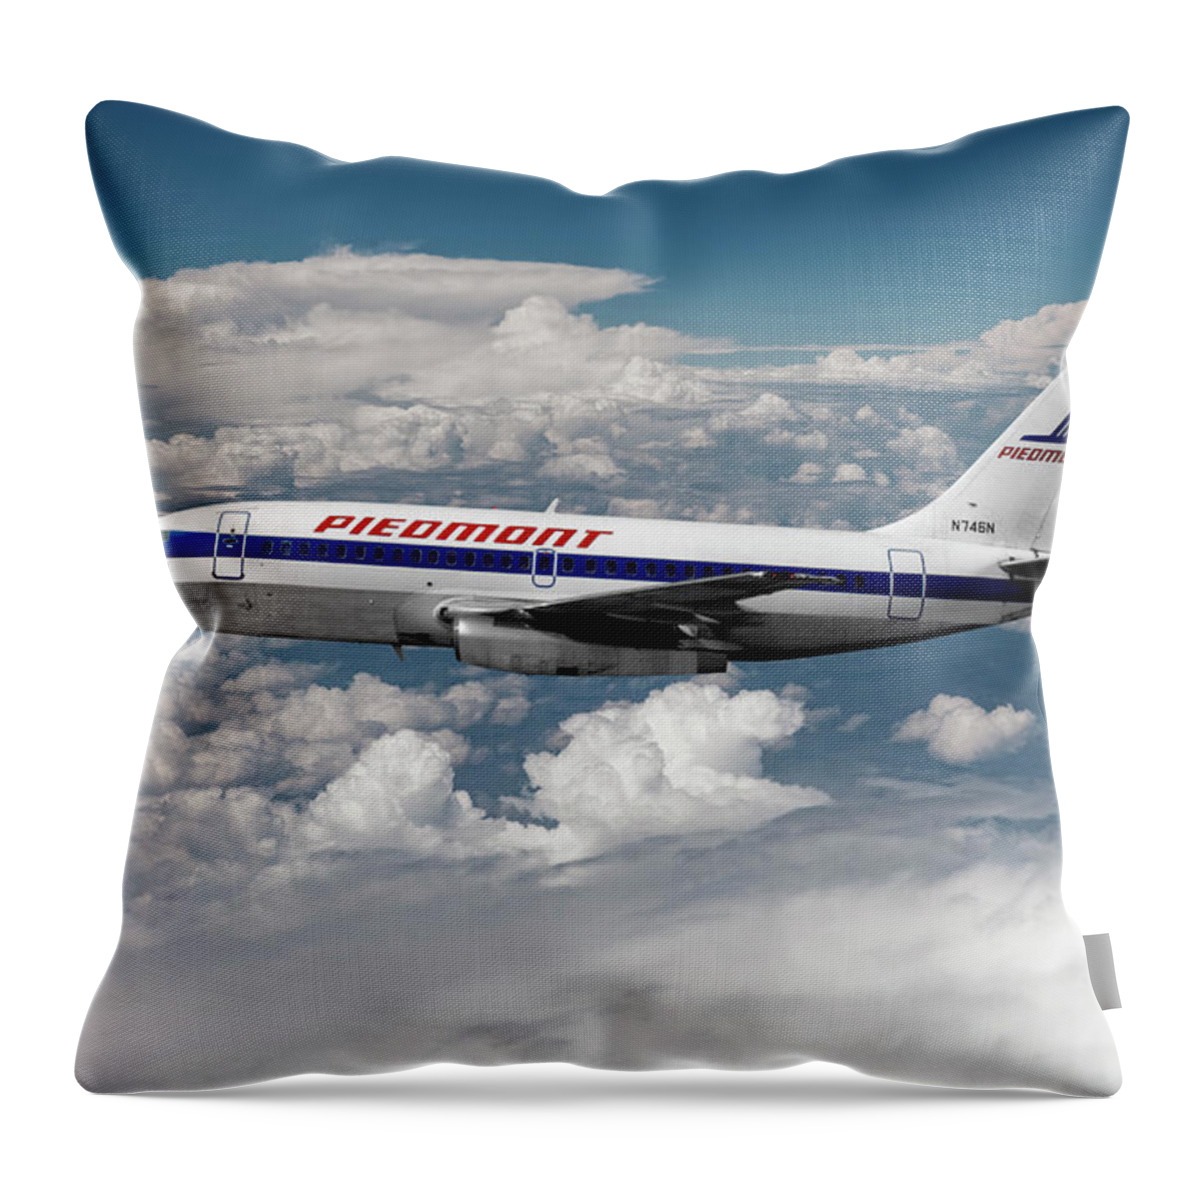 Piedmont Airlines Throw Pillow featuring the mixed media Classic Piedmont Boeing 737 by Erik Simonsen